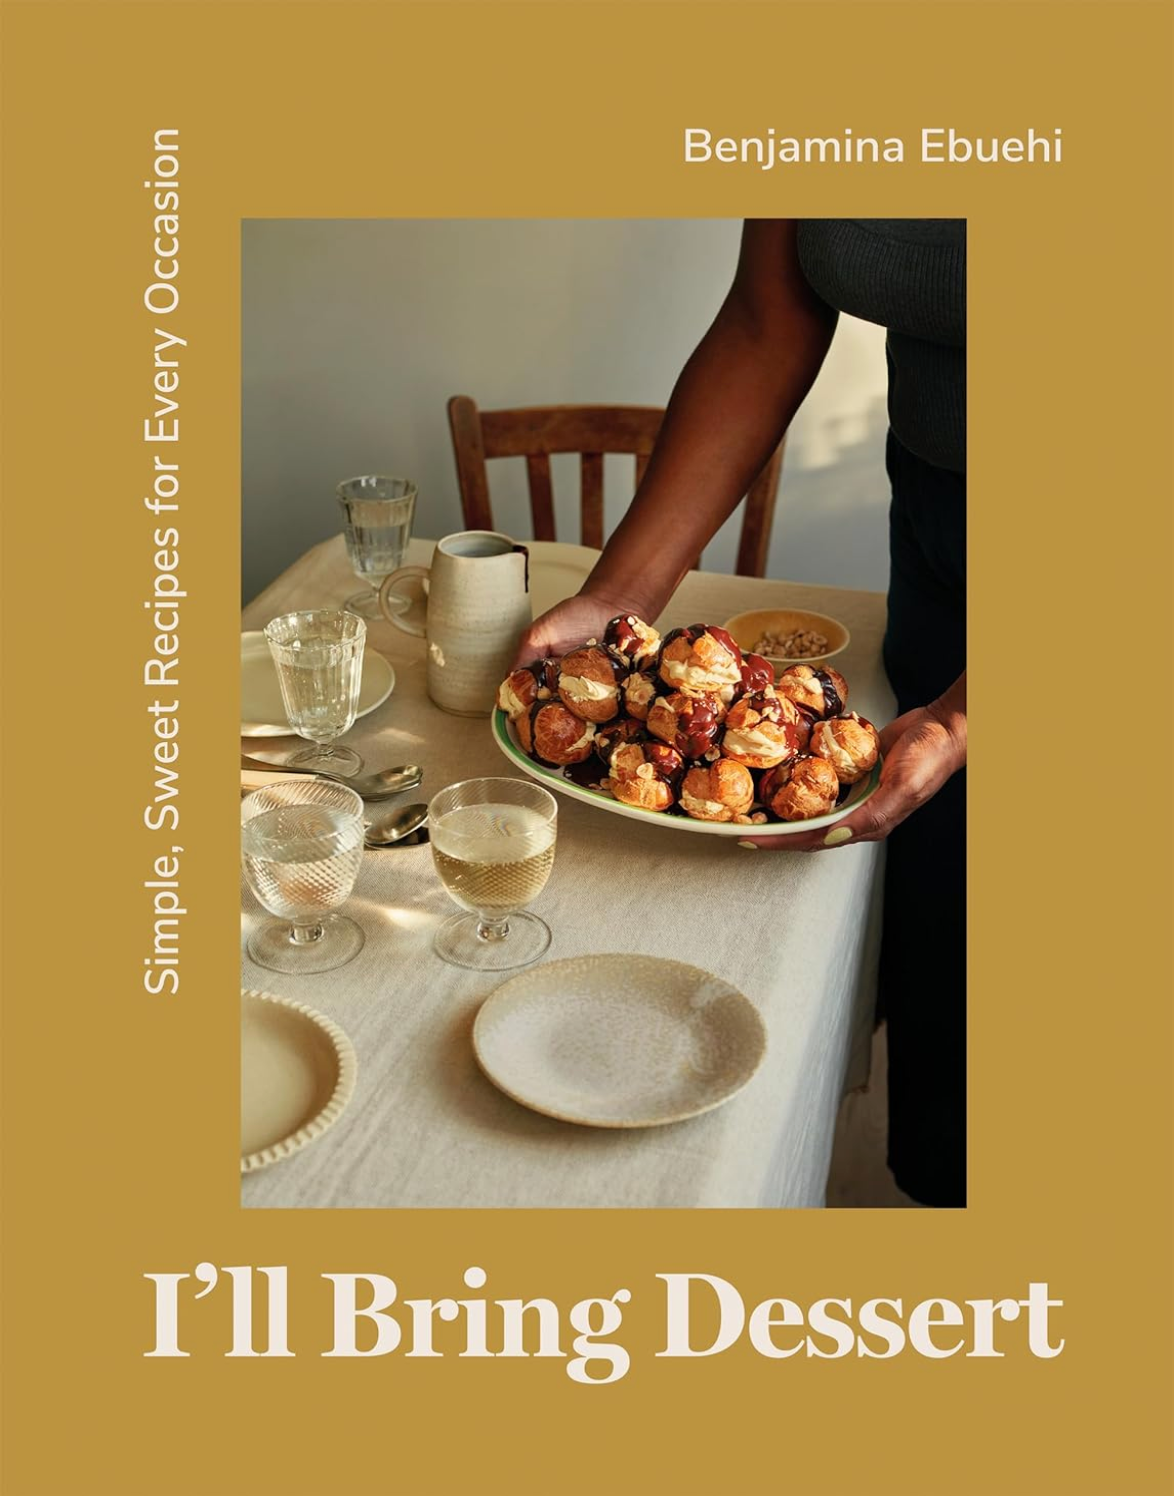 I'll Bring Dessert: Simple, Sweet Recipes for Every Occasion (Benjamina Ebuehi)